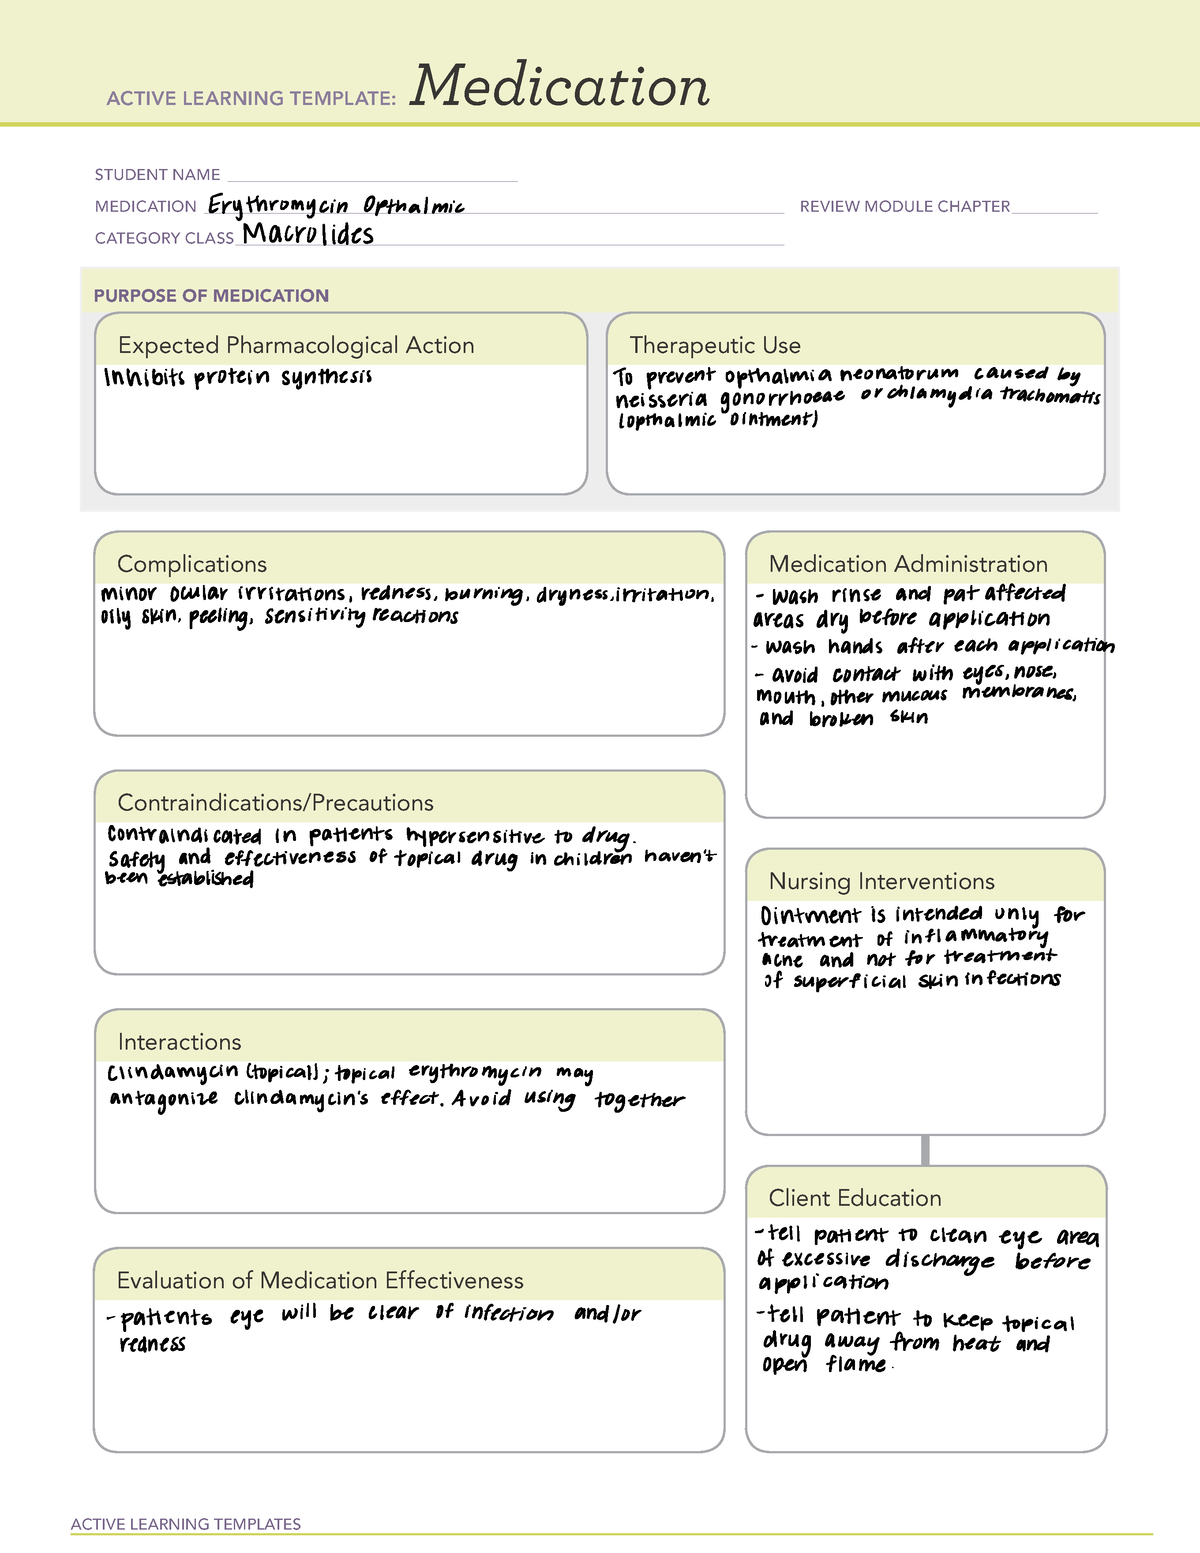 ati-template-erythromycin-ophthalmic-active-learning-templates-medication-student-name-studocu